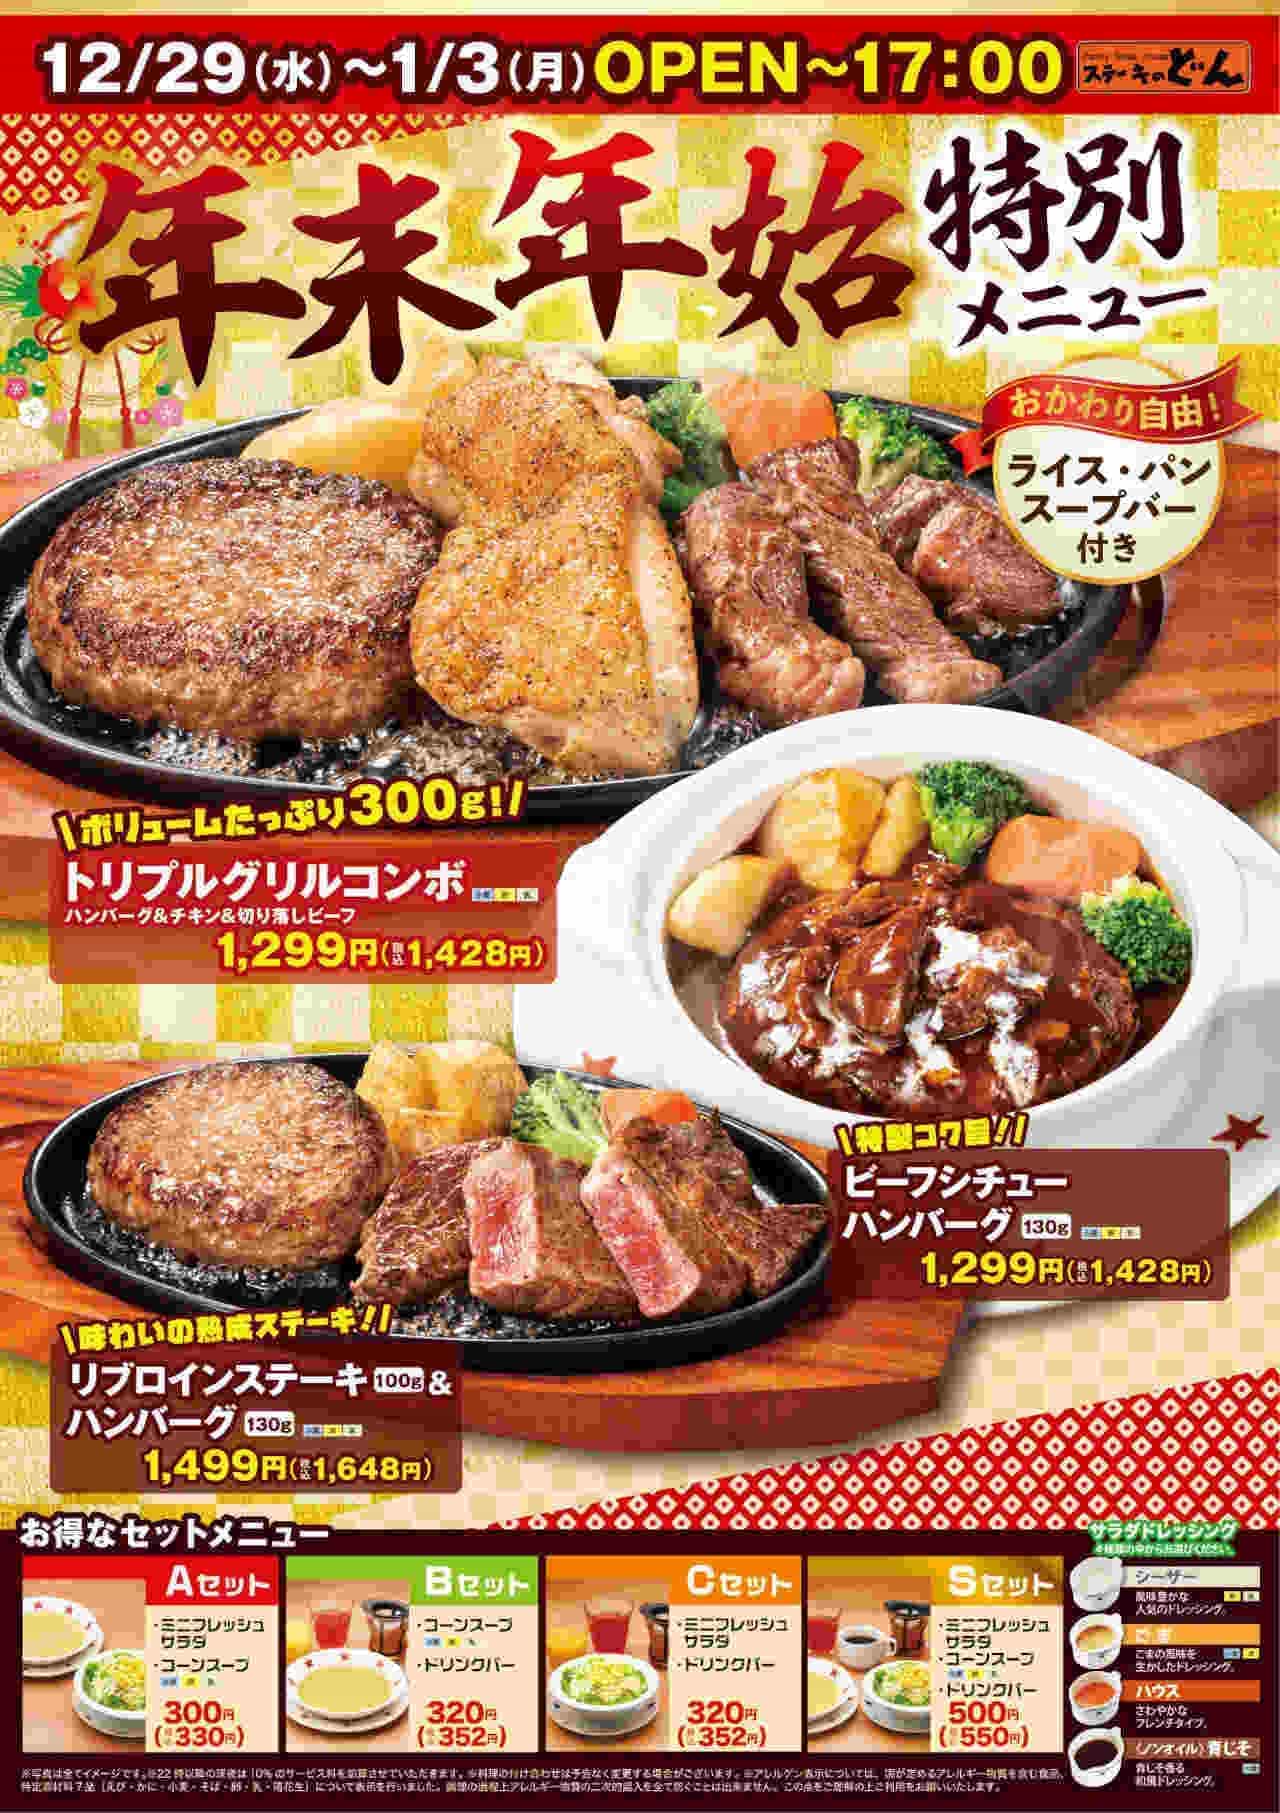 Steak Don Year-end and New Year special menu